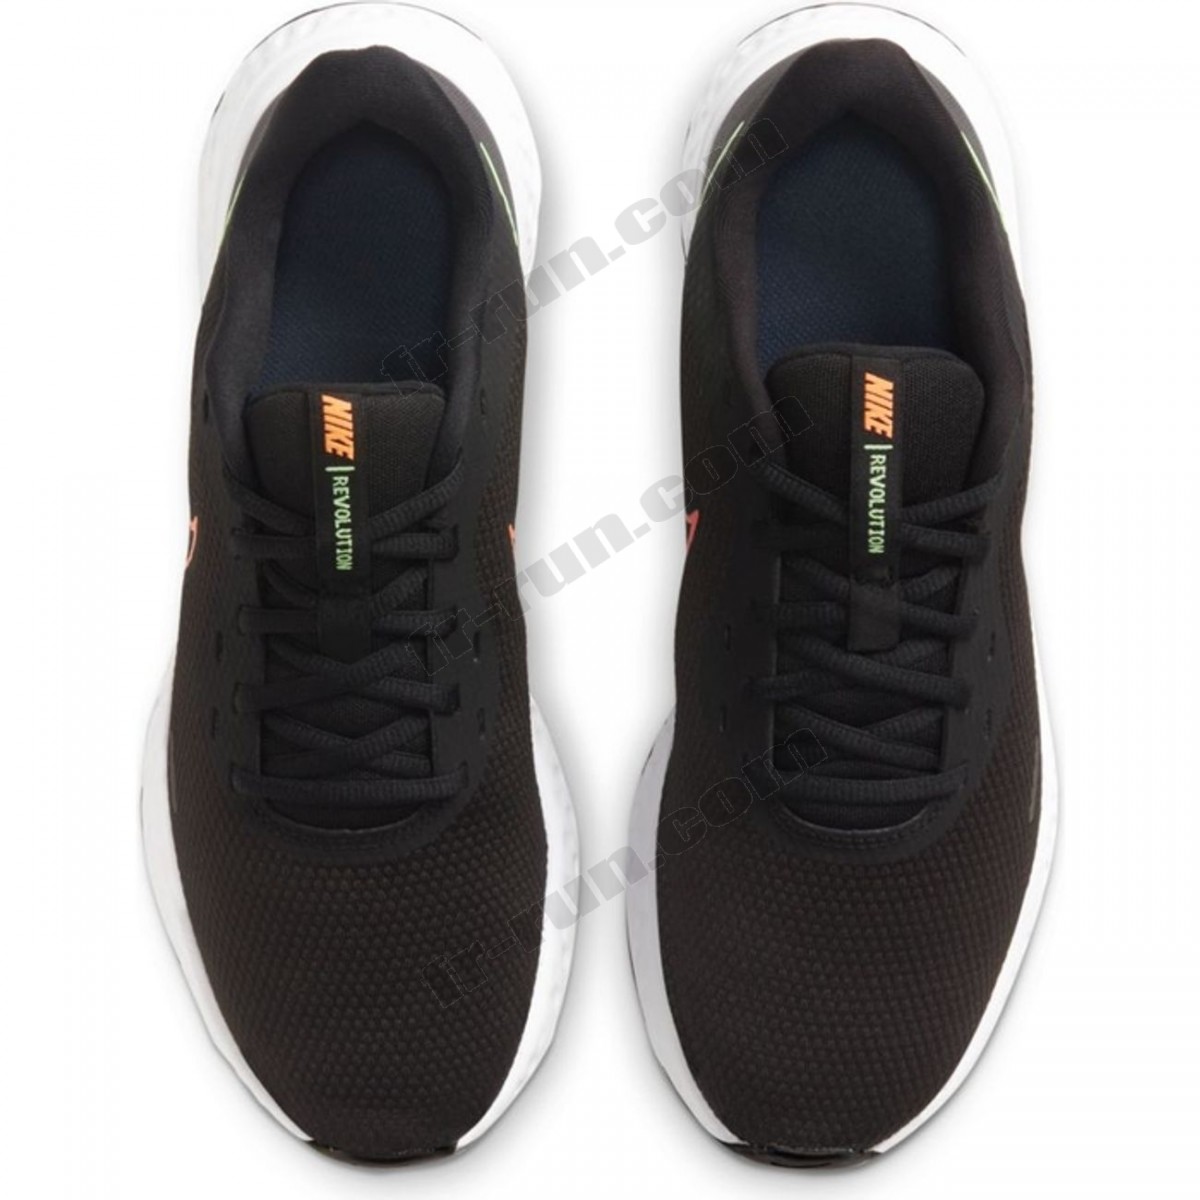 Nike/CHAUSSURES BASSES running homme NIKE NIKE REVOLUTION 5 √ Nouveau style √ Soldes - -2